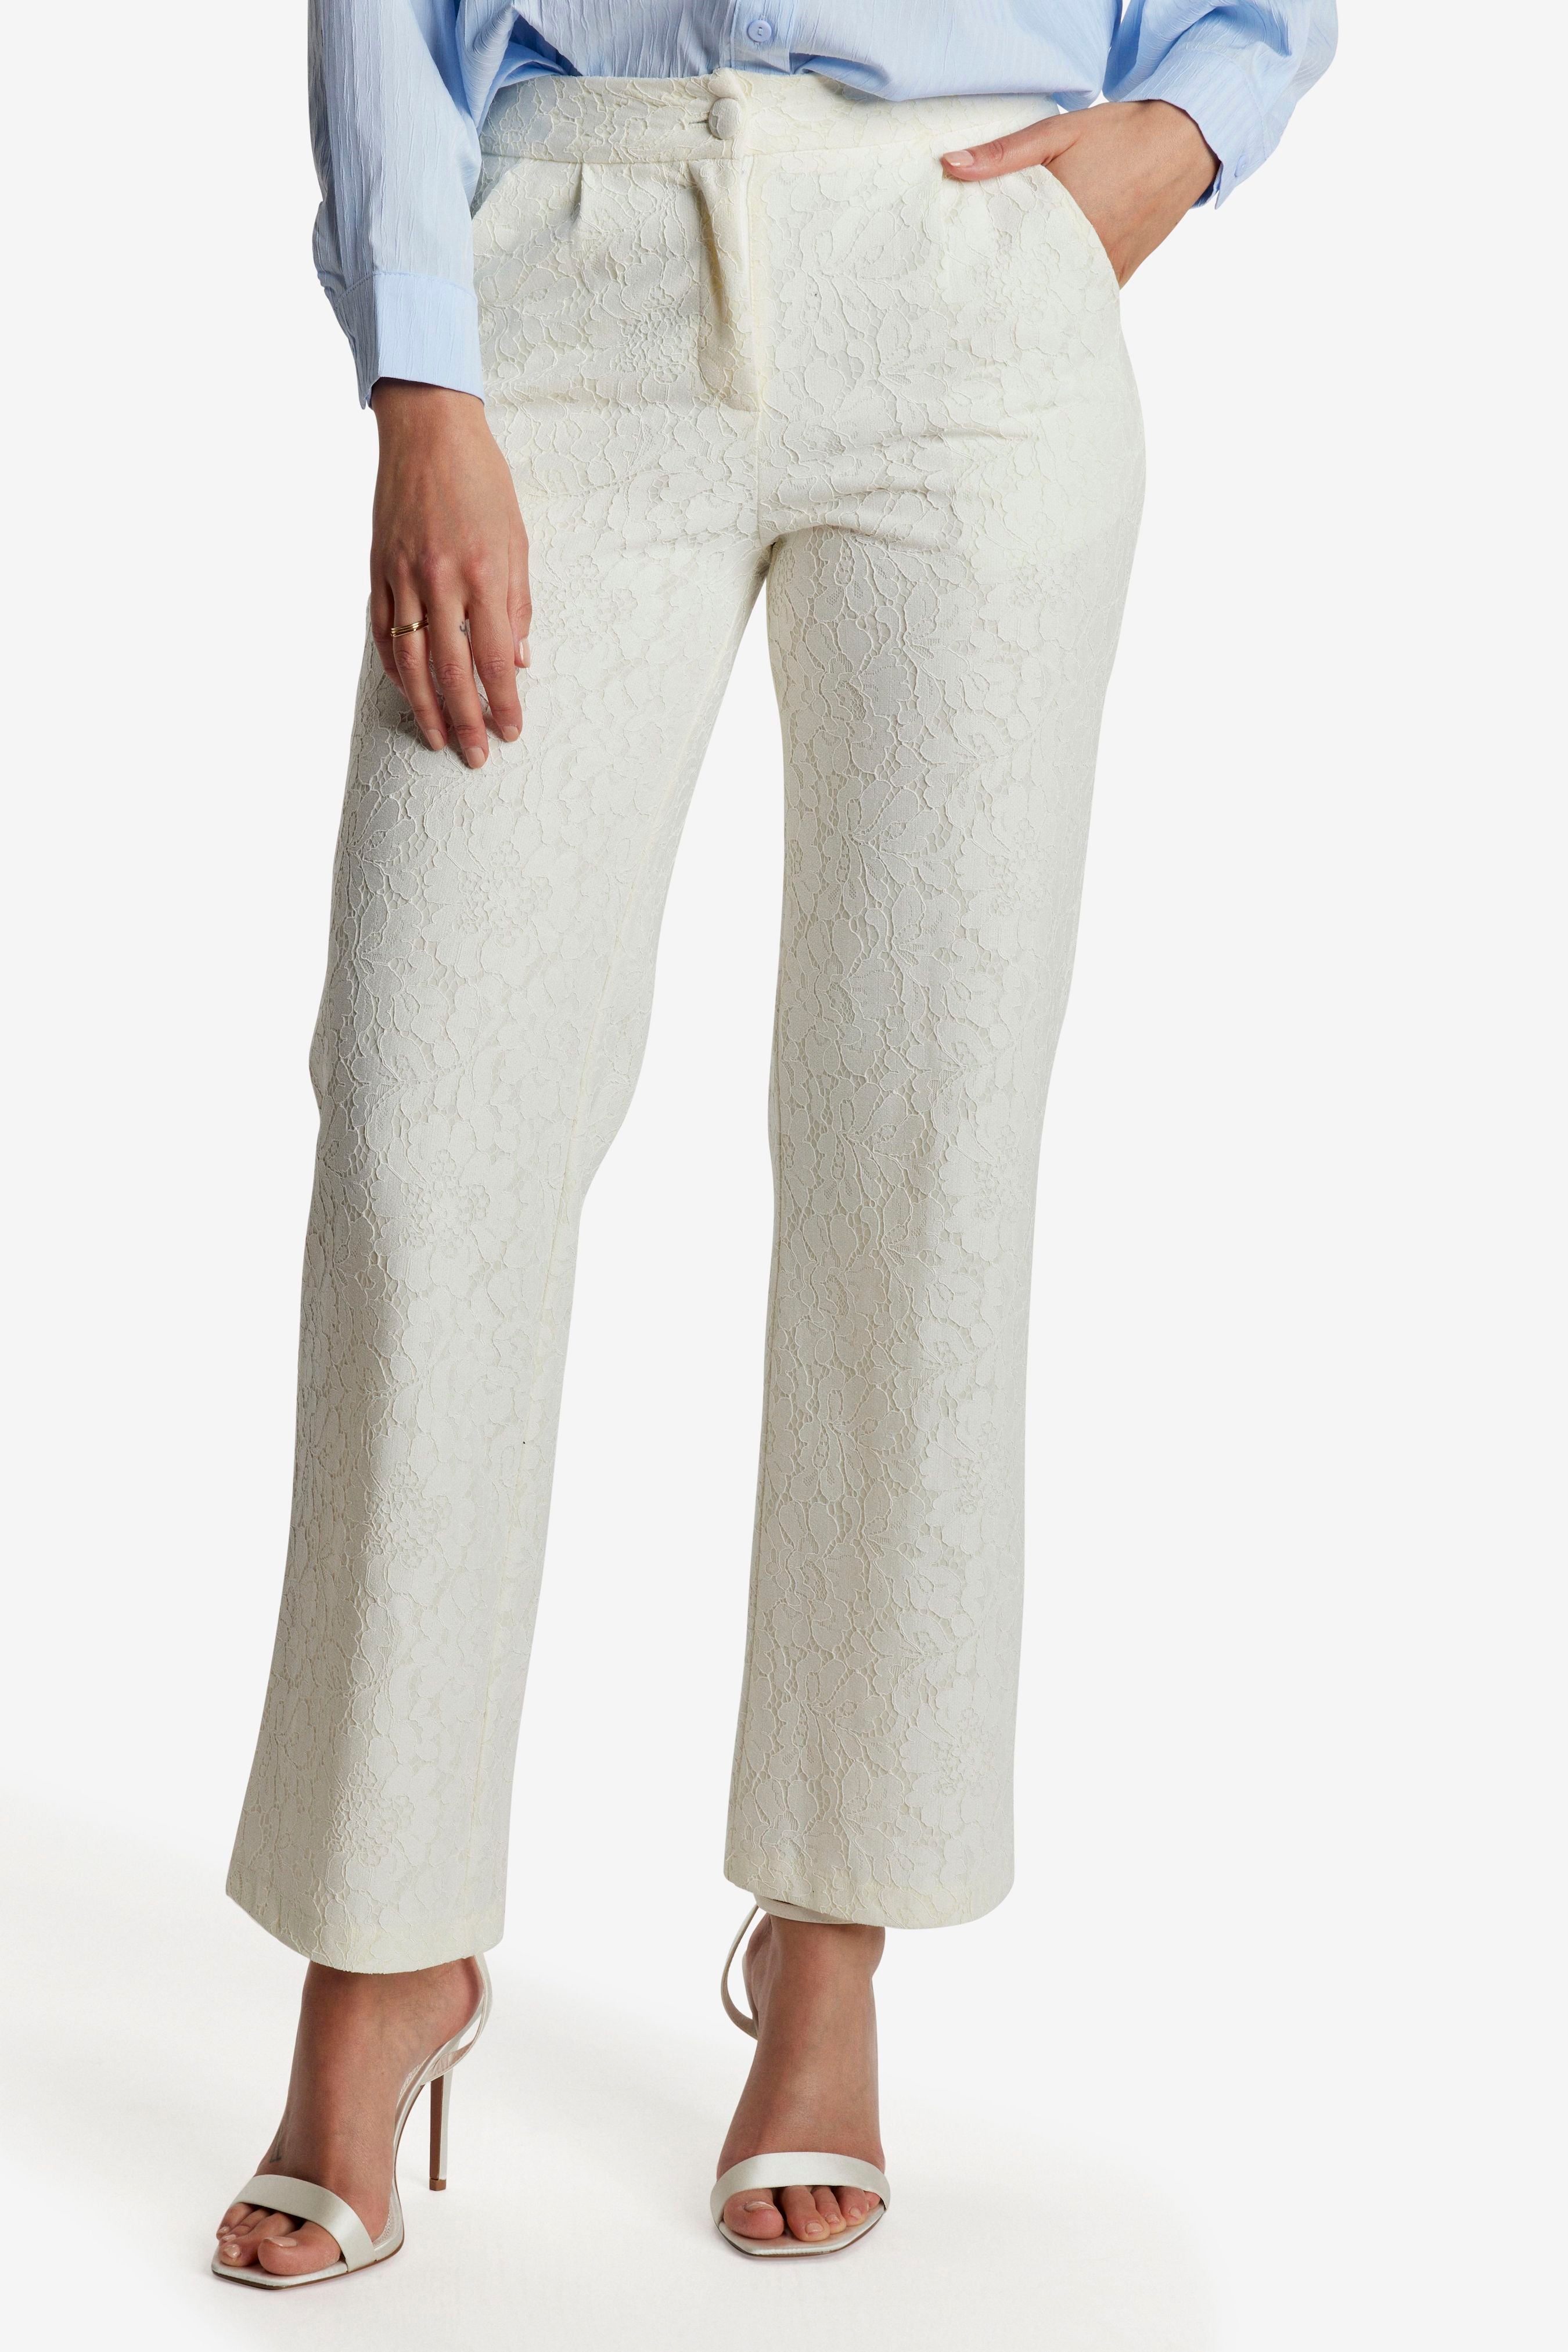 Lined lace trouser